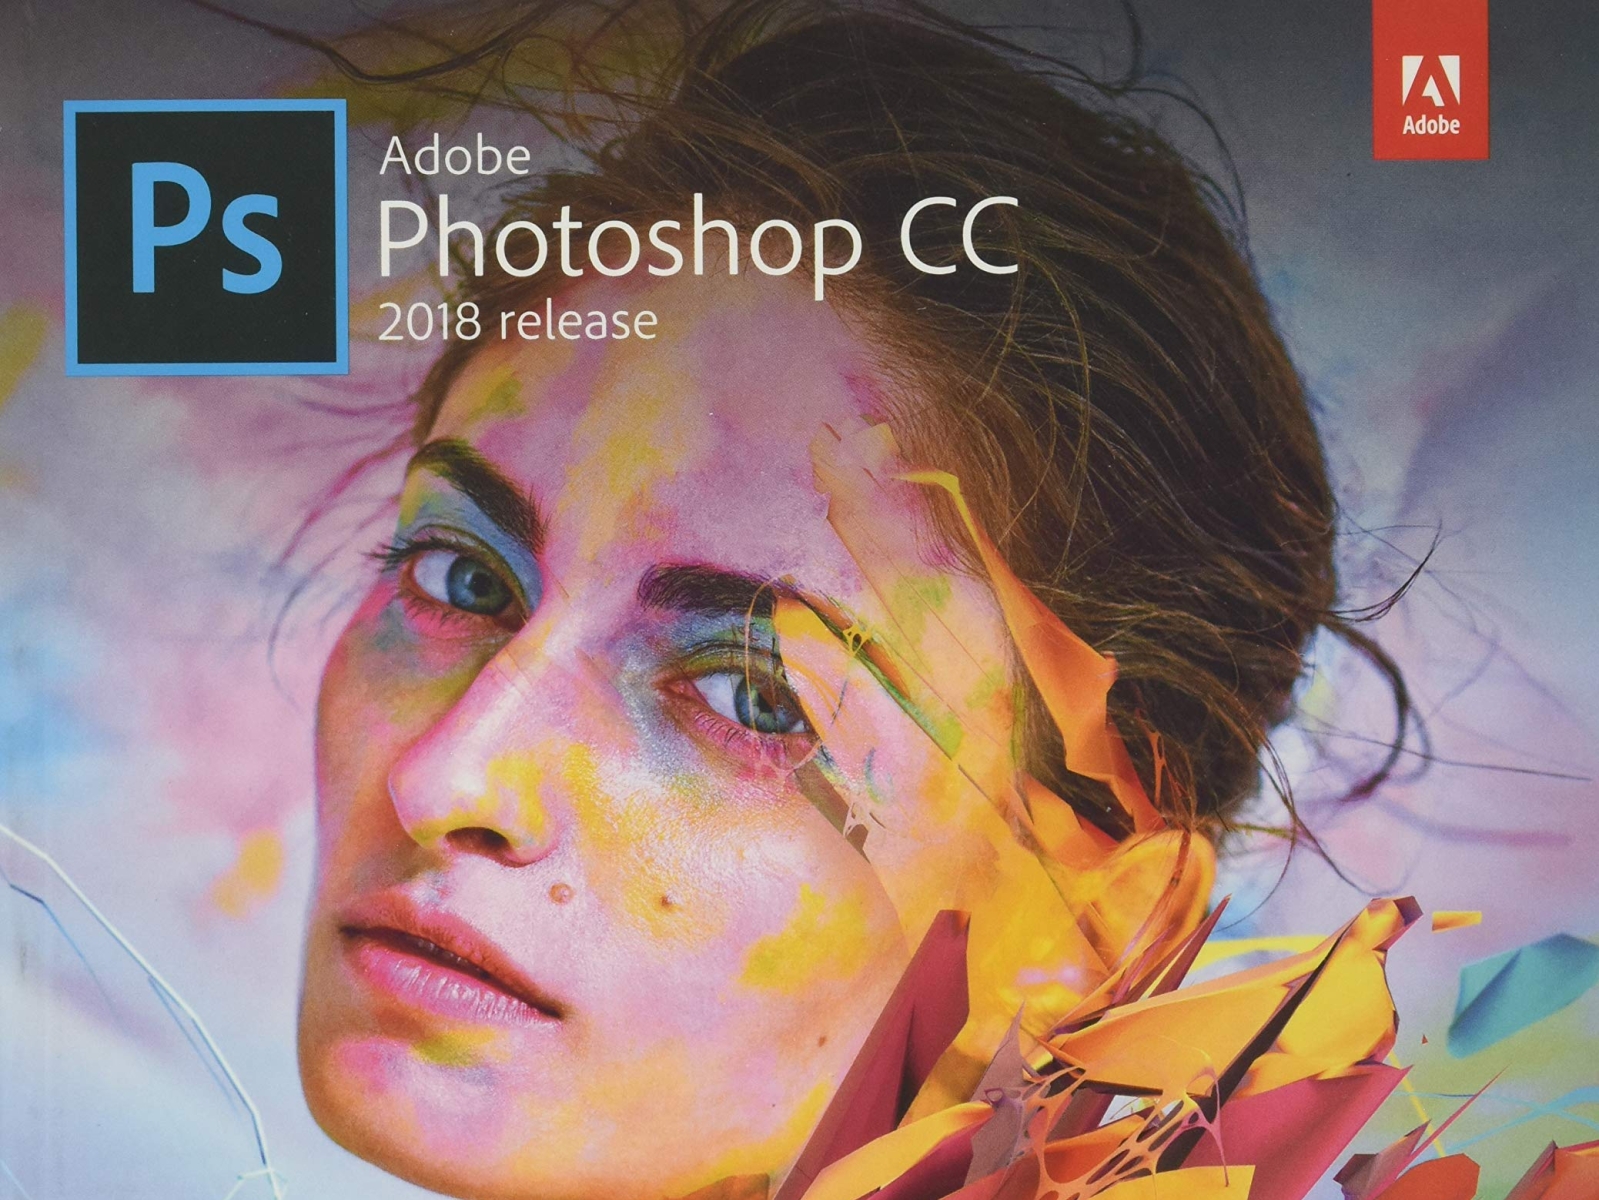 adobe photoshop cc classroom in a book 2018 release download